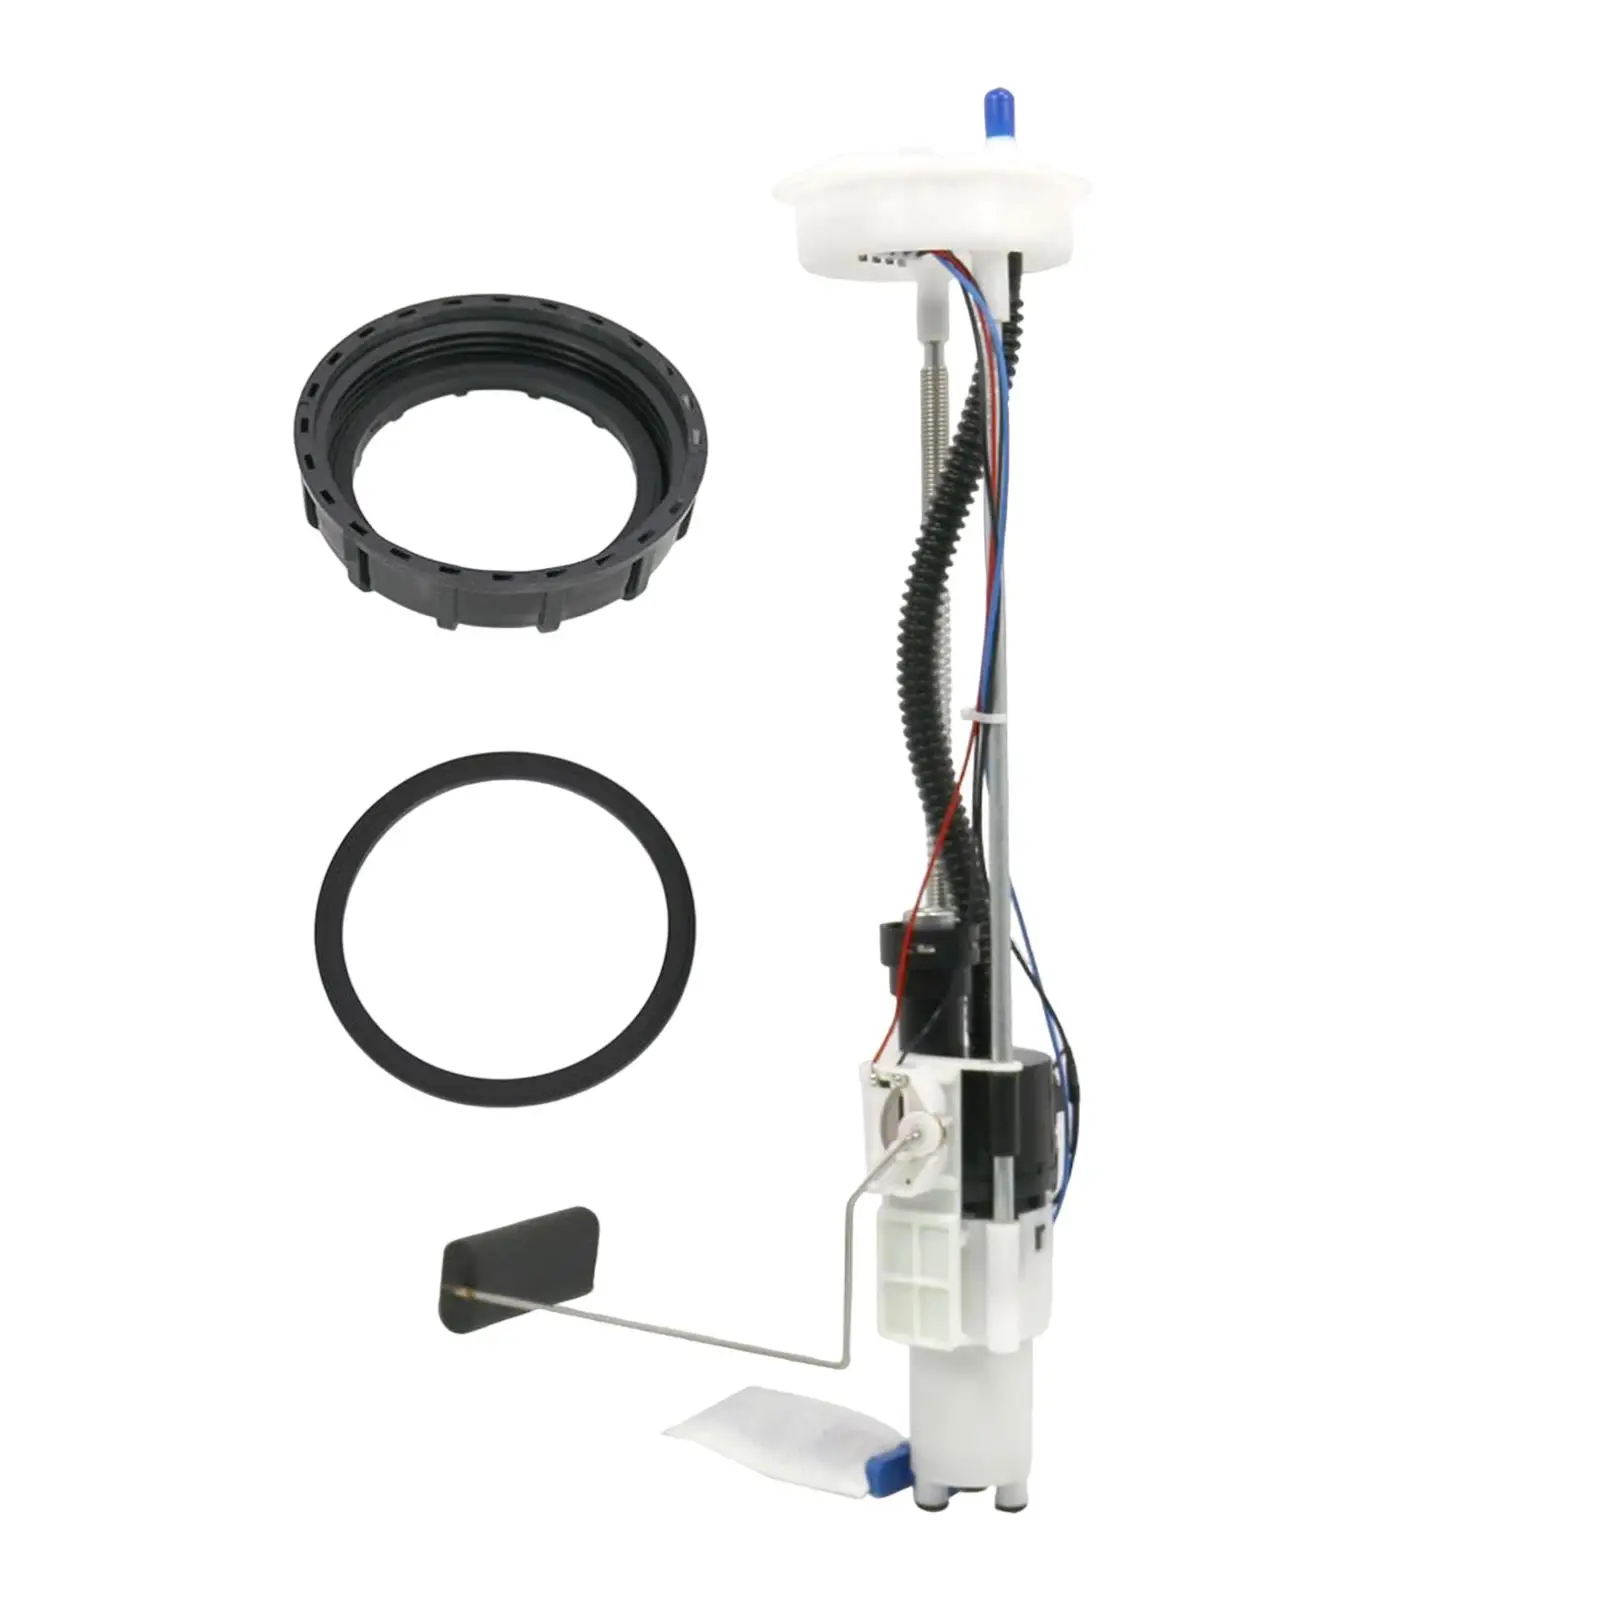 Fuel Pump Assembly 2204945 2204402 2521198 2521091 for Polaris Ranger 800 Etx 570 Replace Easy Installation